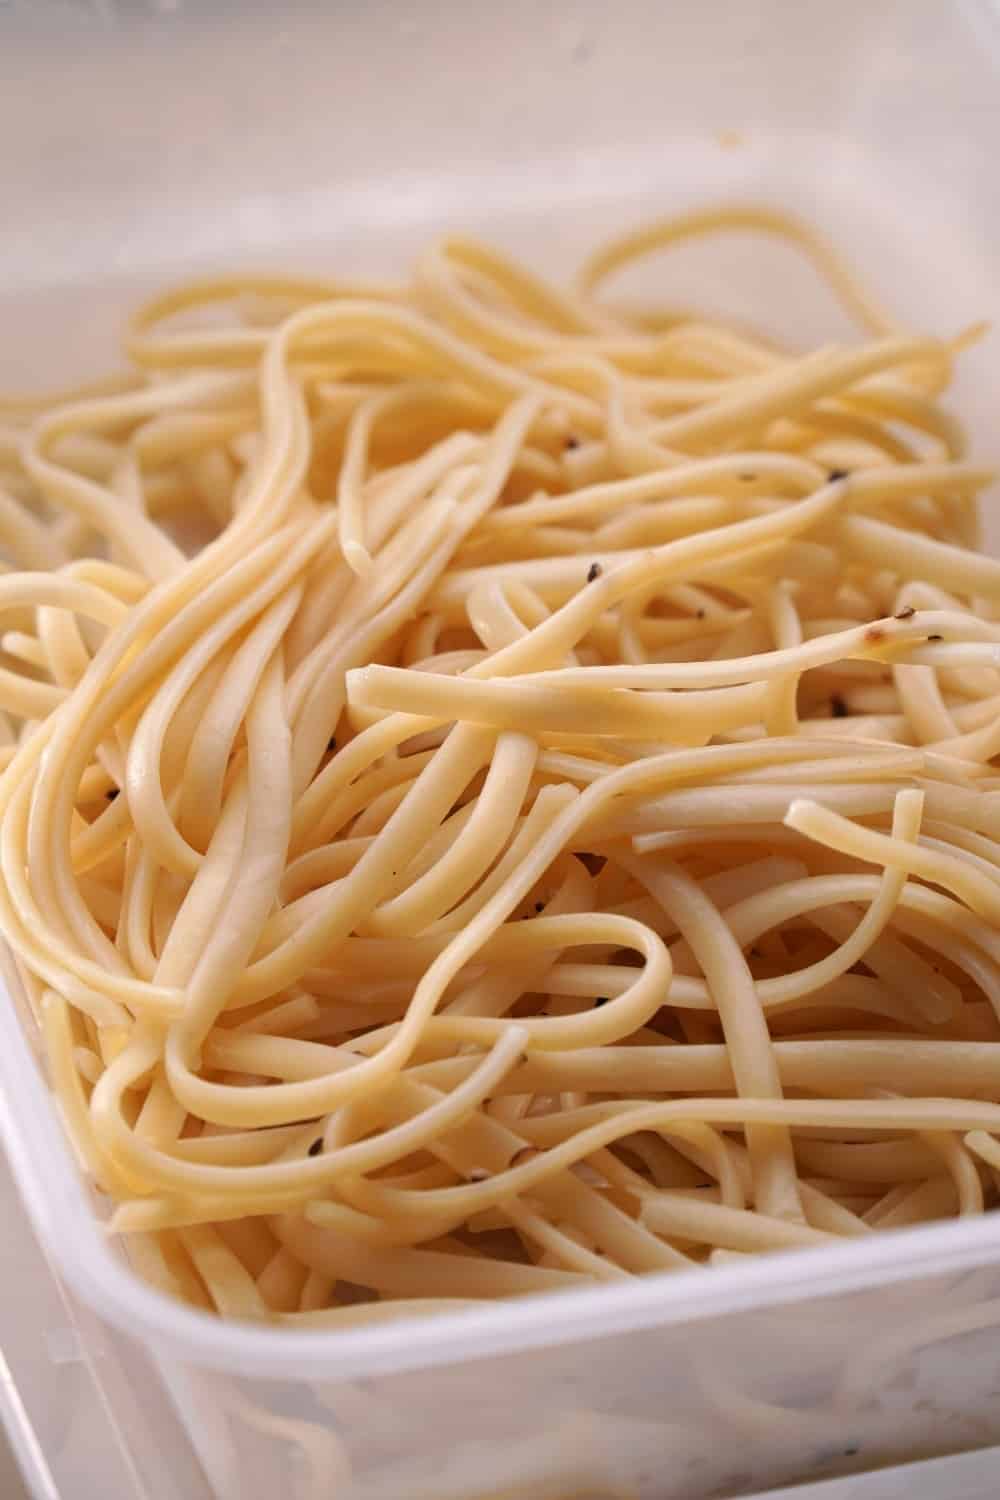 cooked spaghetti in a plastic container